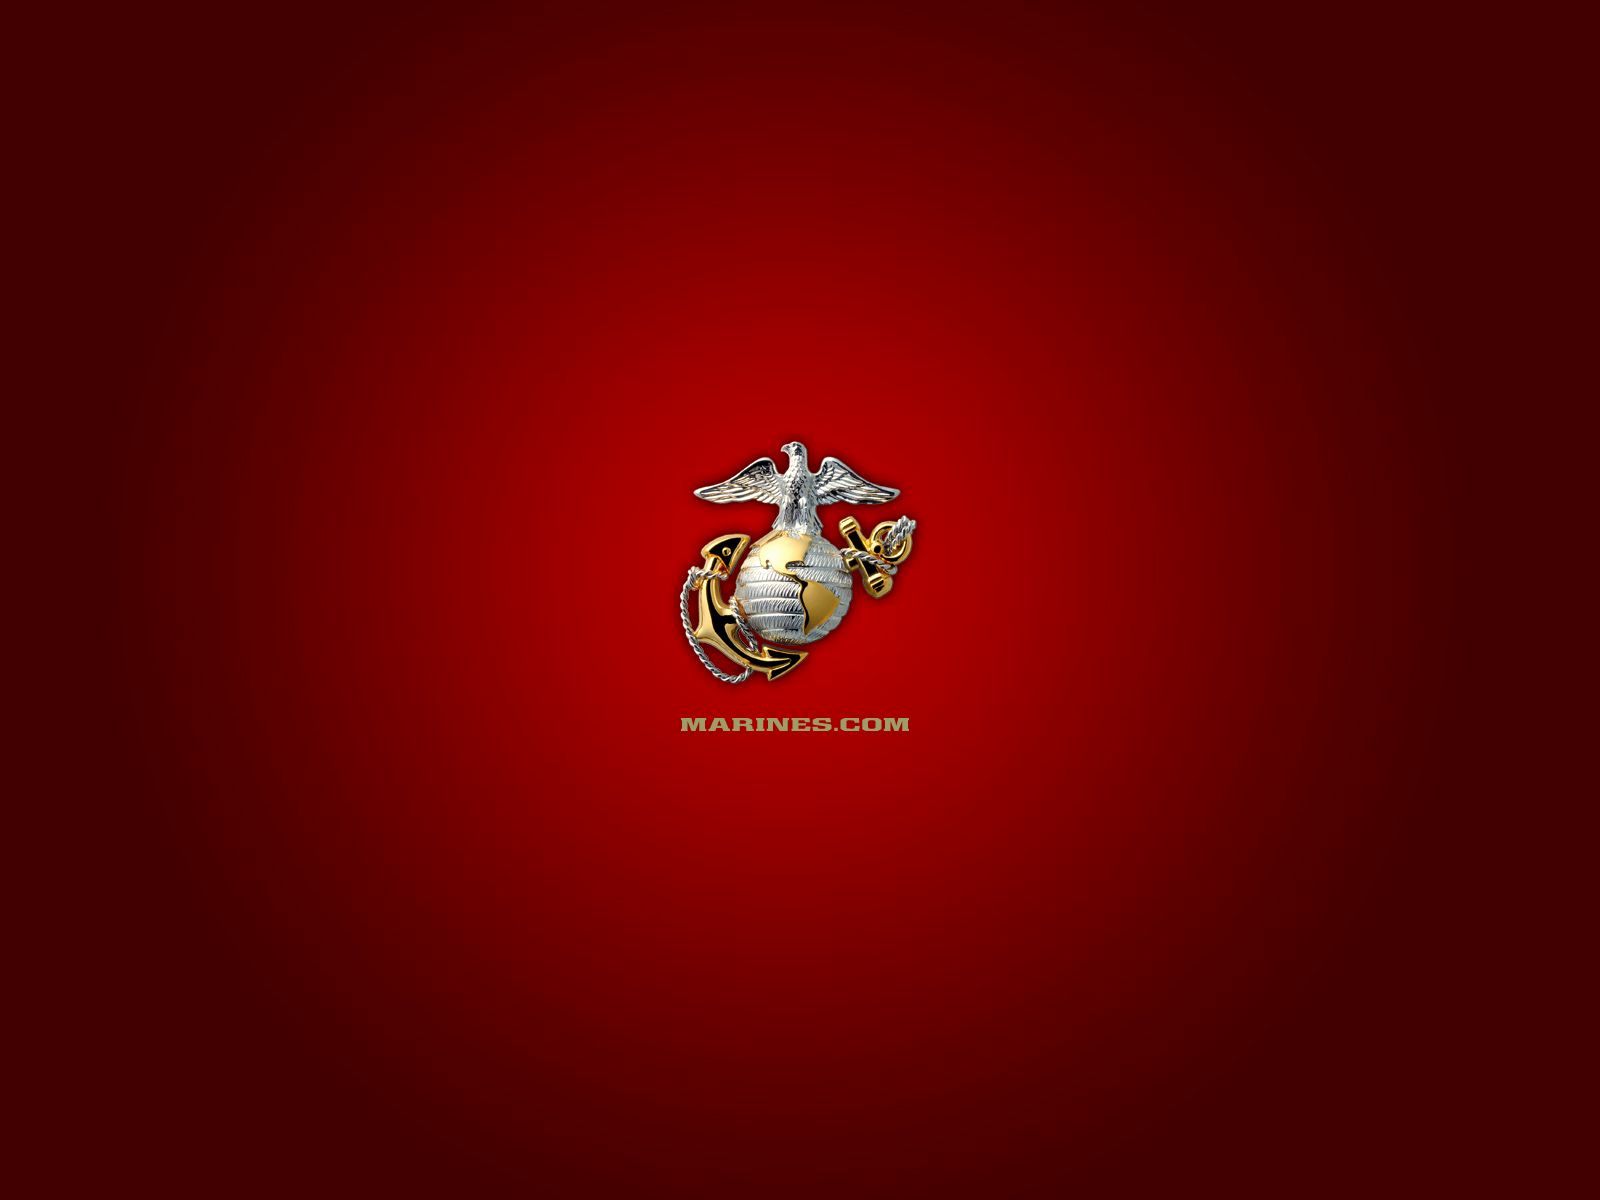 Marine Corps Wallpapers Top Free Marine Corps Backgrounds - High Resolution Marine Corps , HD Wallpaper & Backgrounds